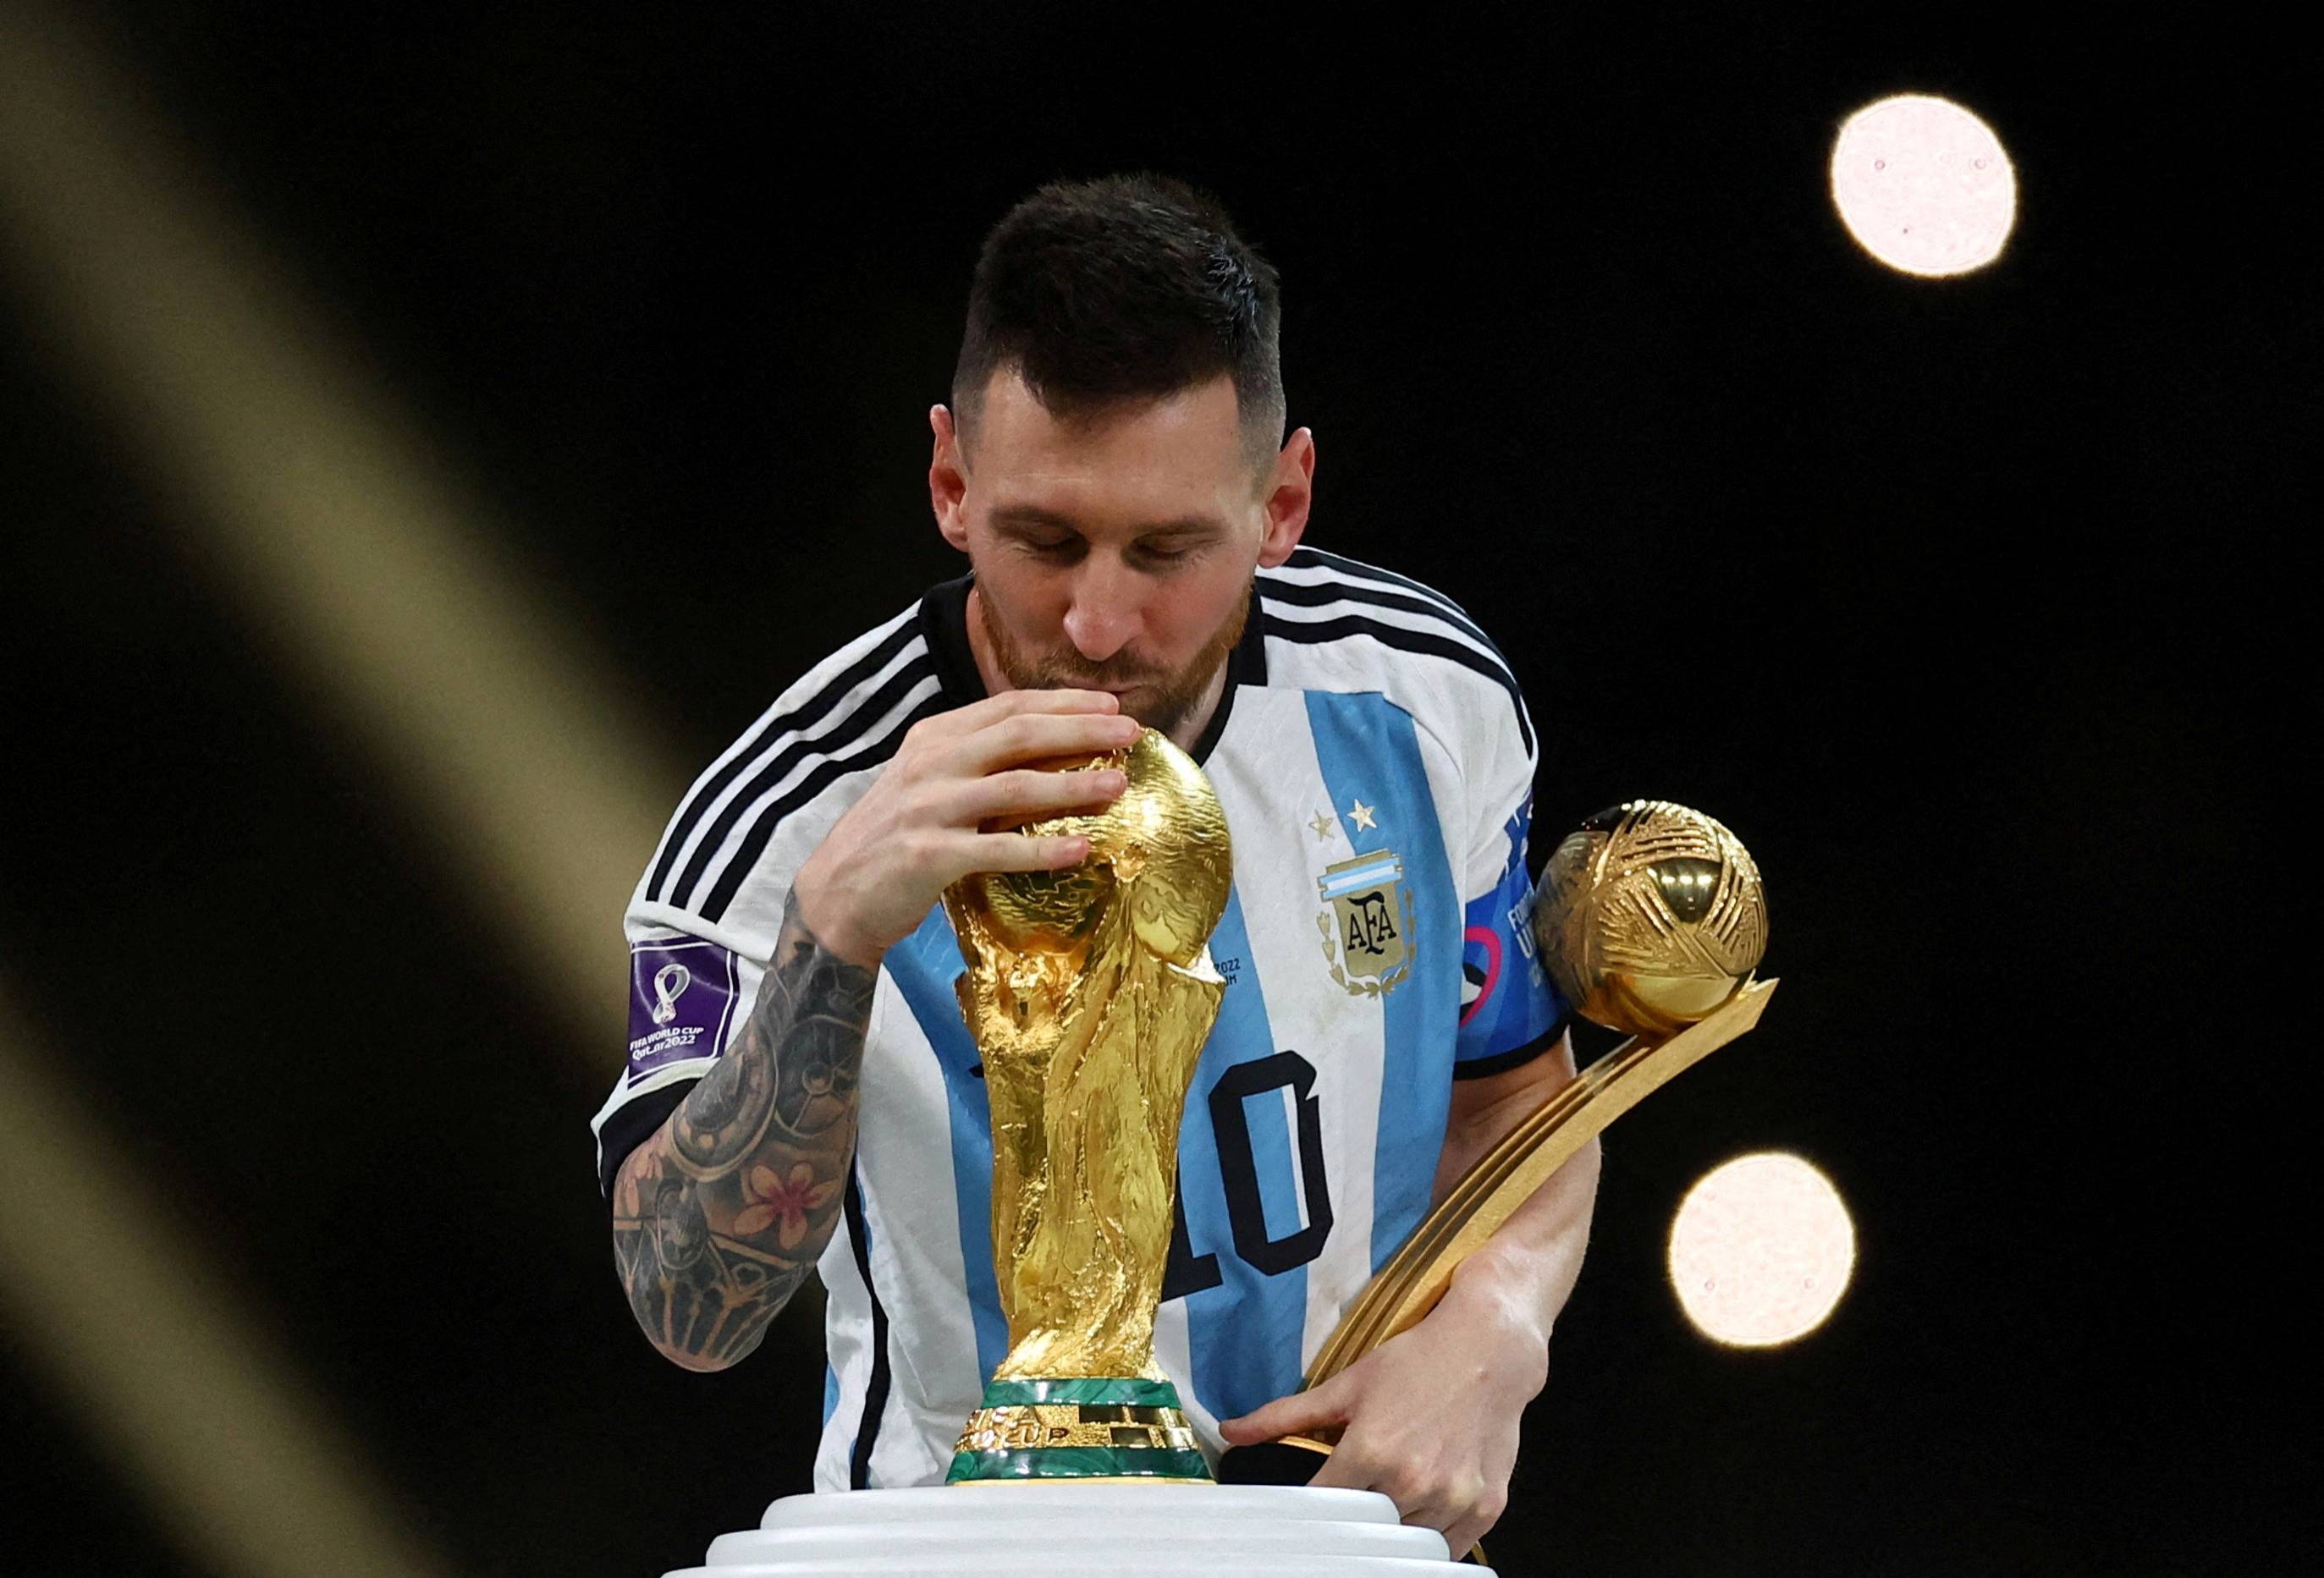 World Cup 2022: Is Lionel Messi the best player in the history of